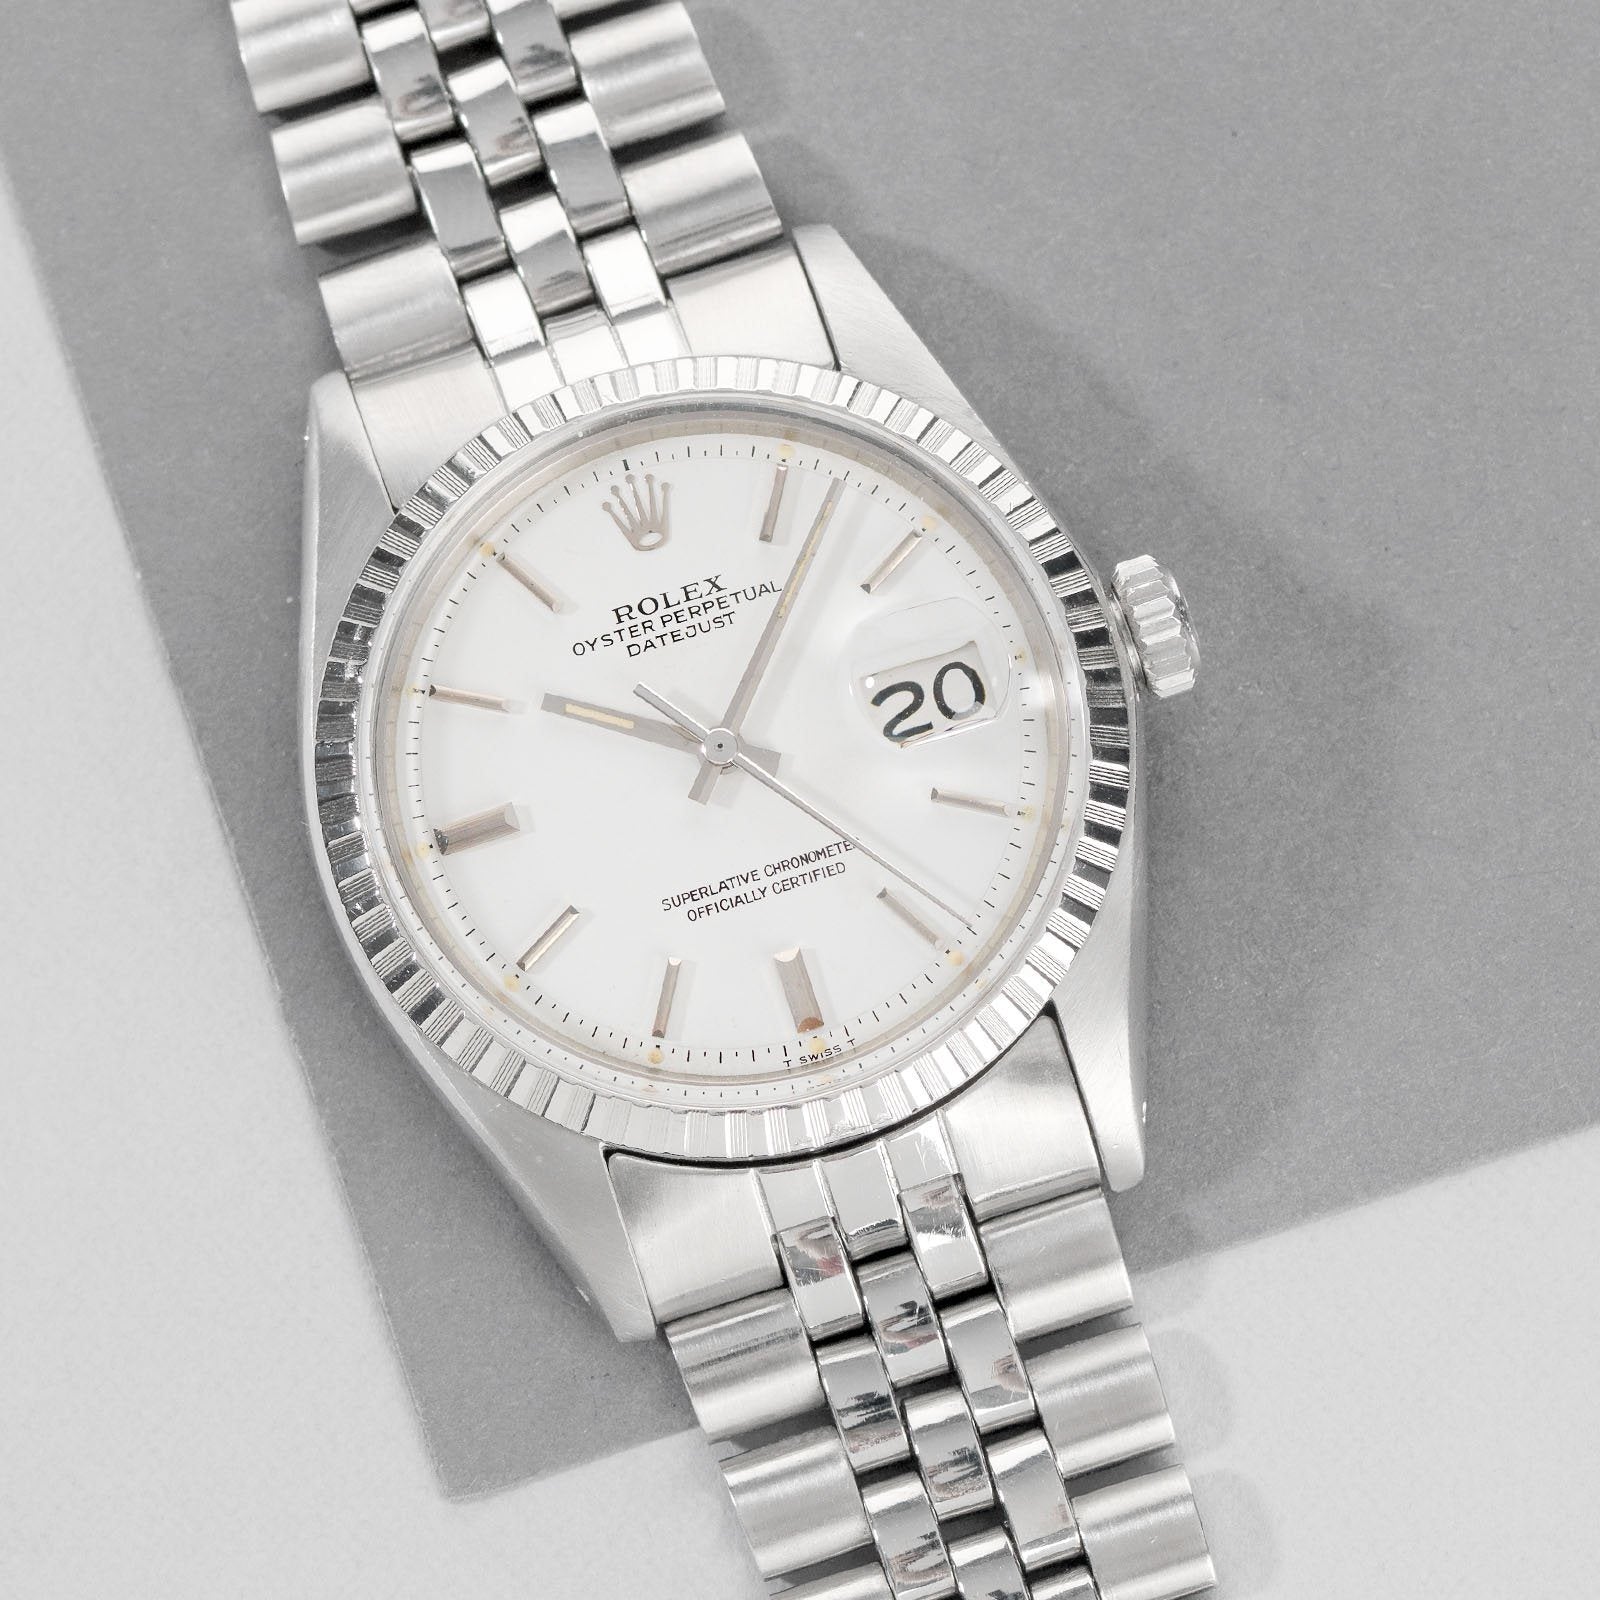 datejust white face